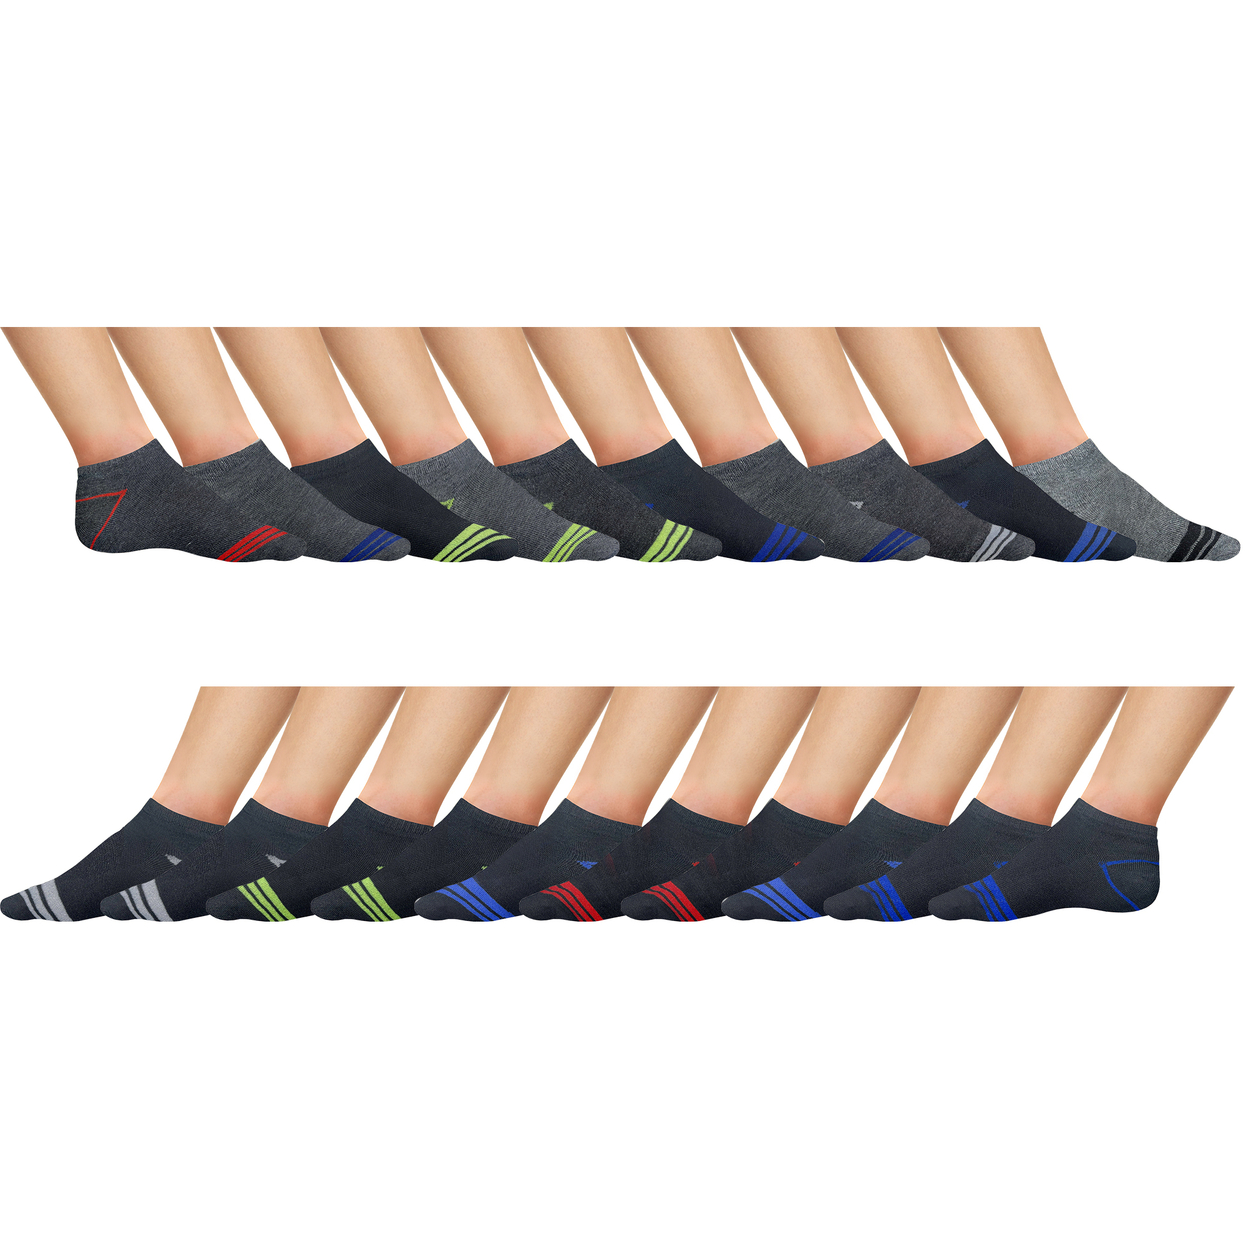 10/20-Pairs: Men's Moisture Wicking Performance Mesh Running Active Low-Cut Athletic Ankle Socks - 20-pairs